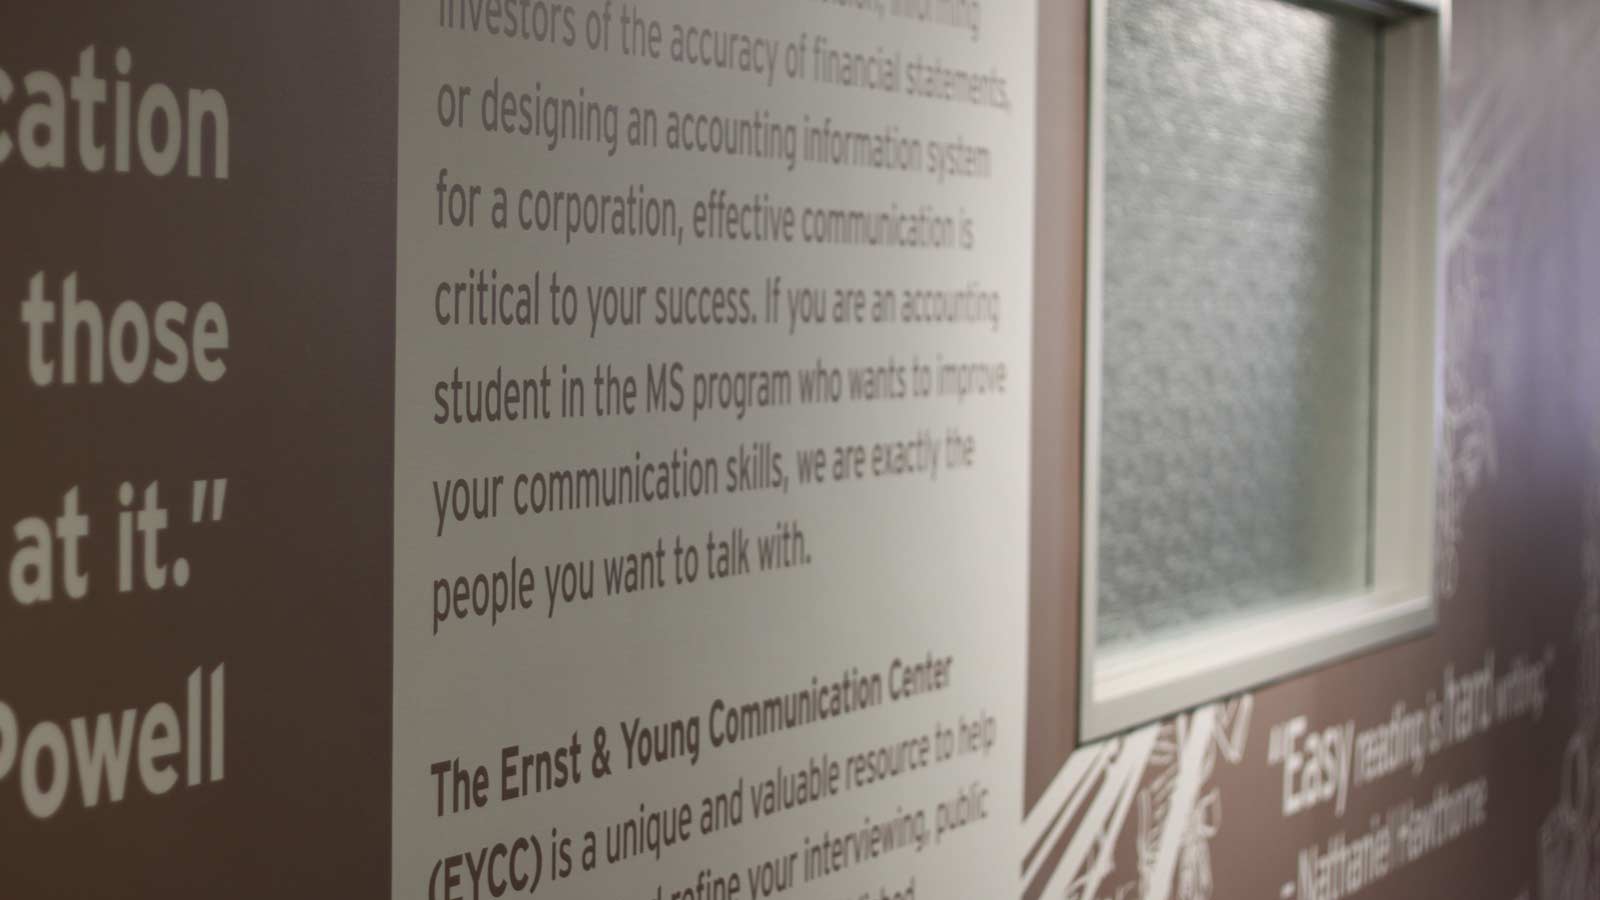 Wall inside the Ernst & Young Communication Center, filled with quotes about communication.